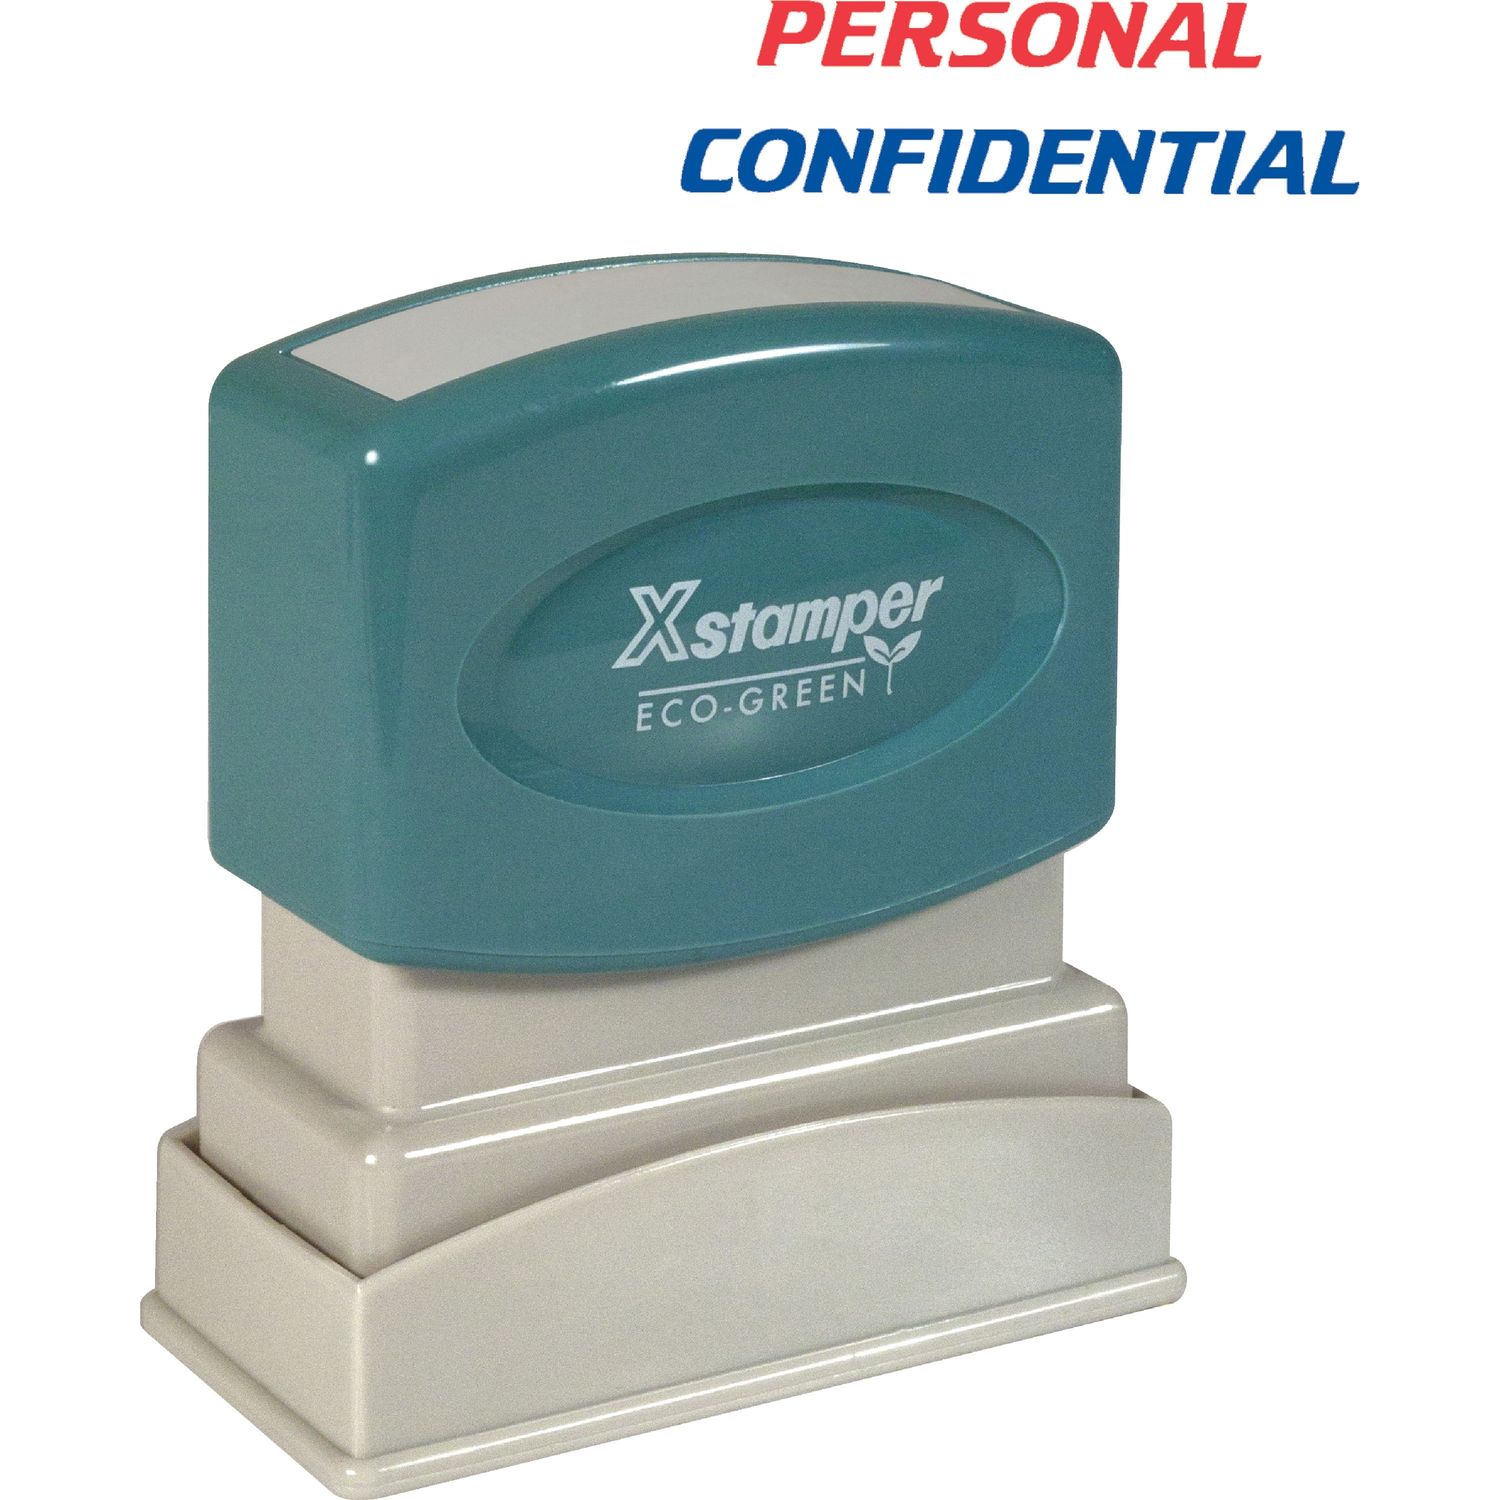 PERSONAL CONFIDENTIAL Stamp Message Stamp, "PERSONAL/CONFIDENTIAL", 0.50" Impression Width x 1.62" Impression Length, 100000 Impression(s), Red, Blue, Polymer, Recycled, 1 Each